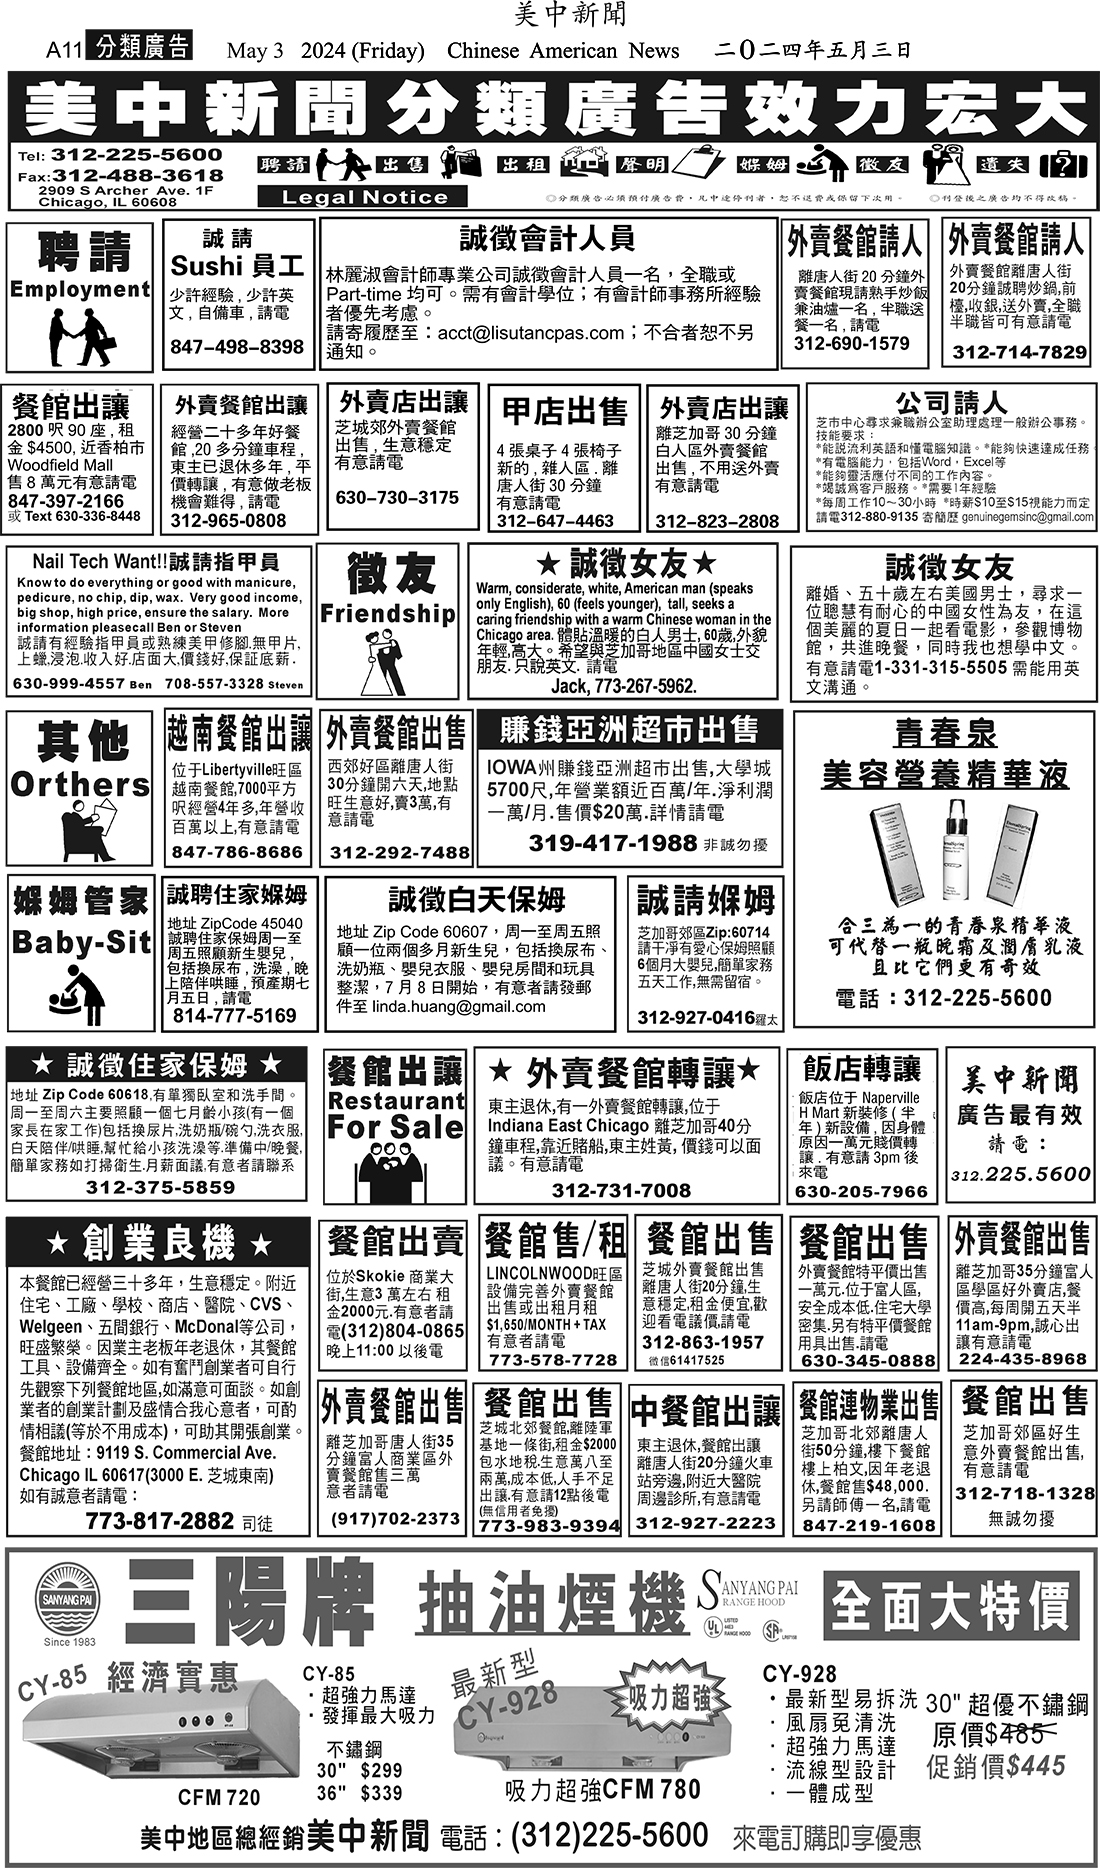 Chinese American News Page A11